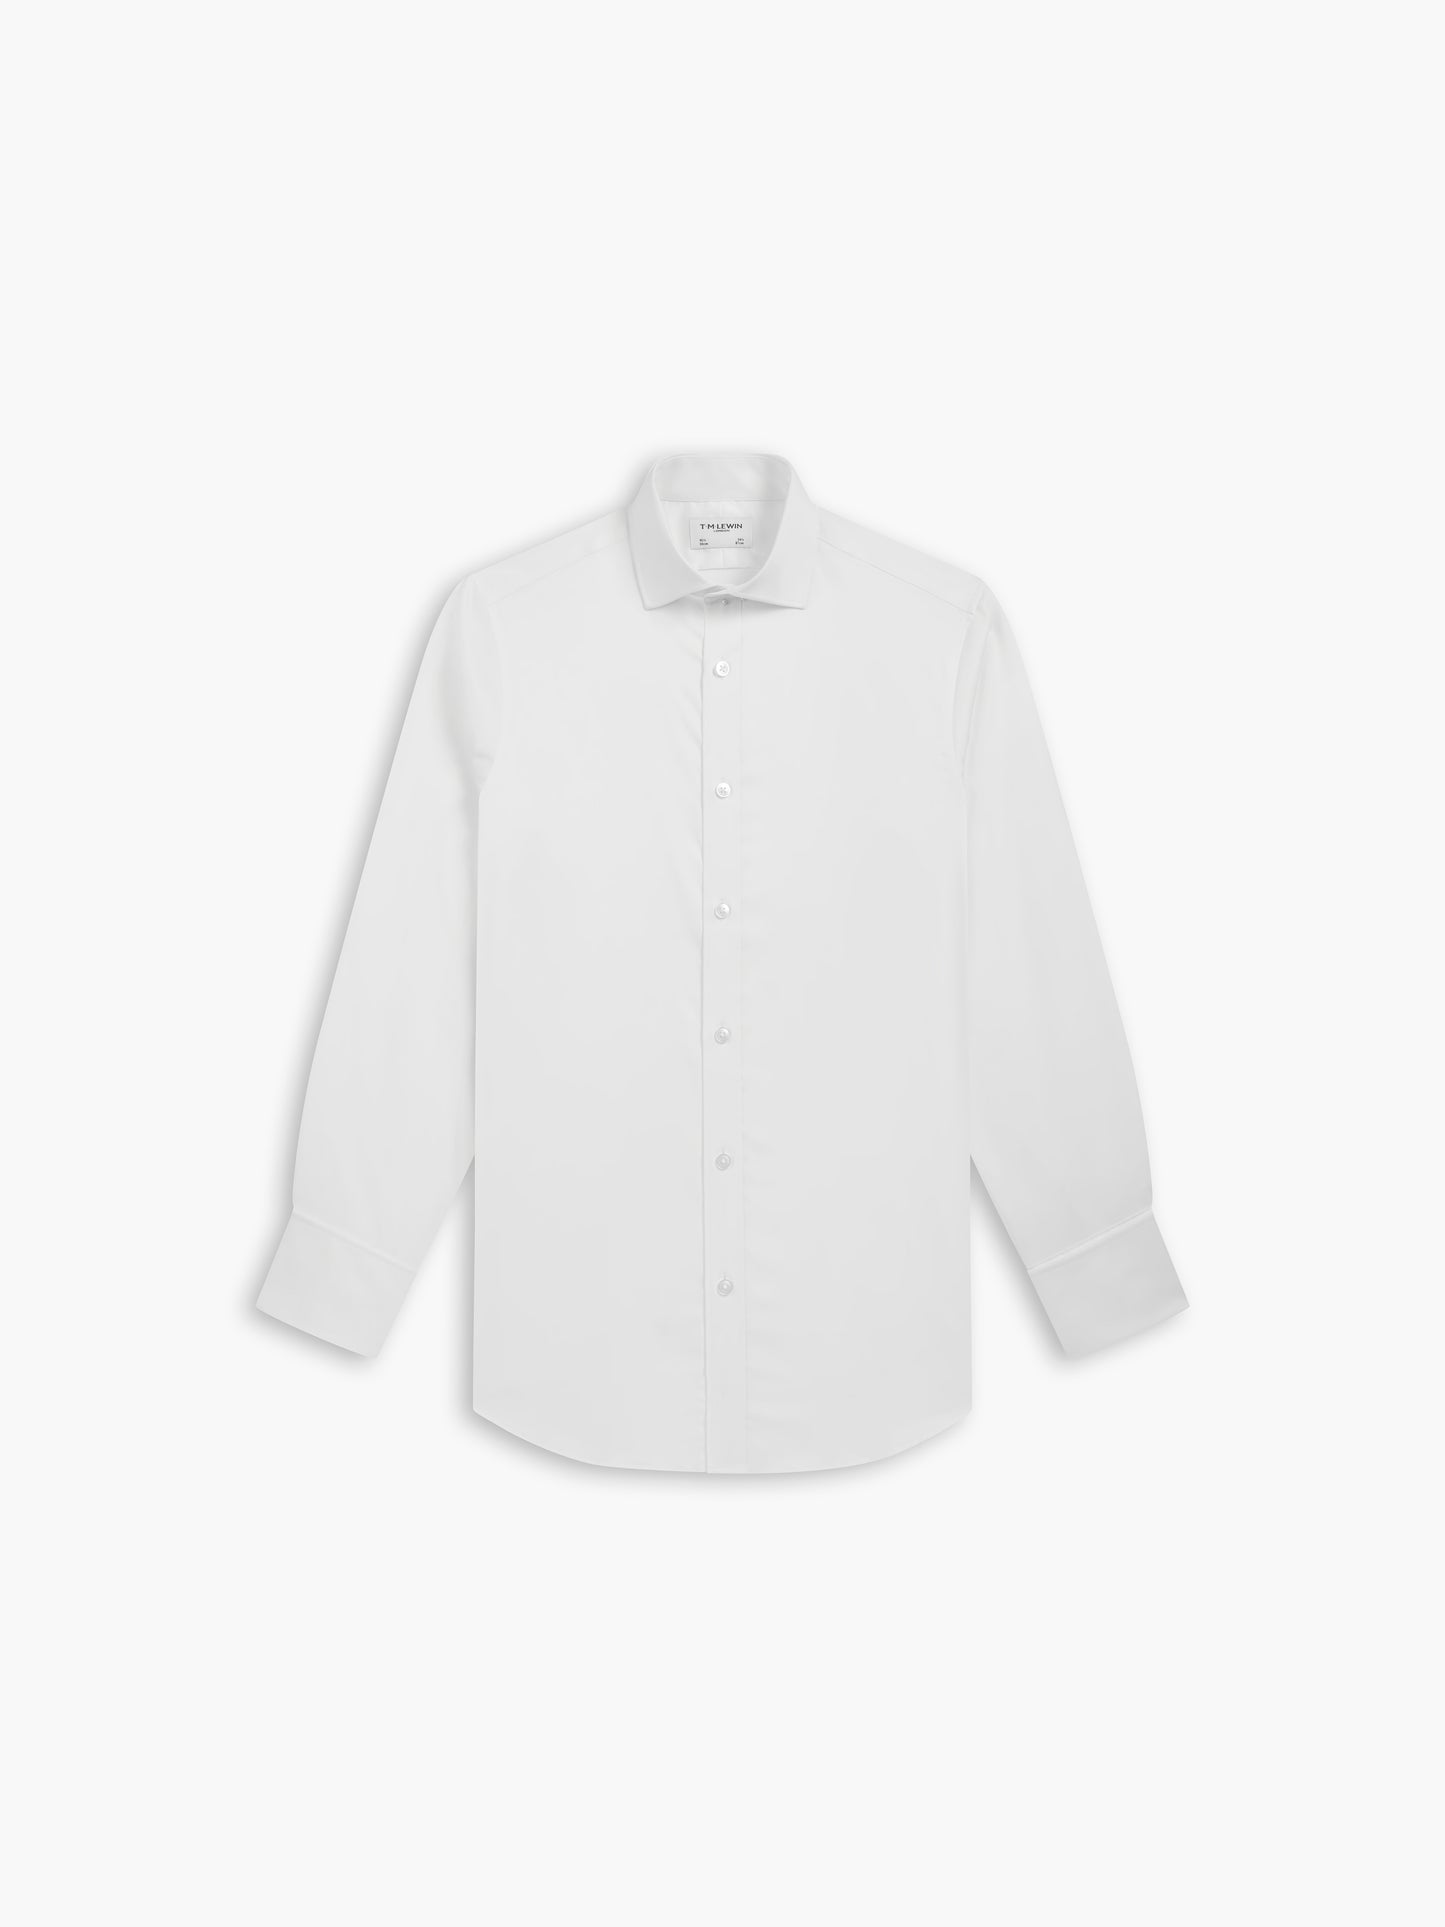 Max Performance White Twill Regular Fit Double Cuff Classic Collar Shirt